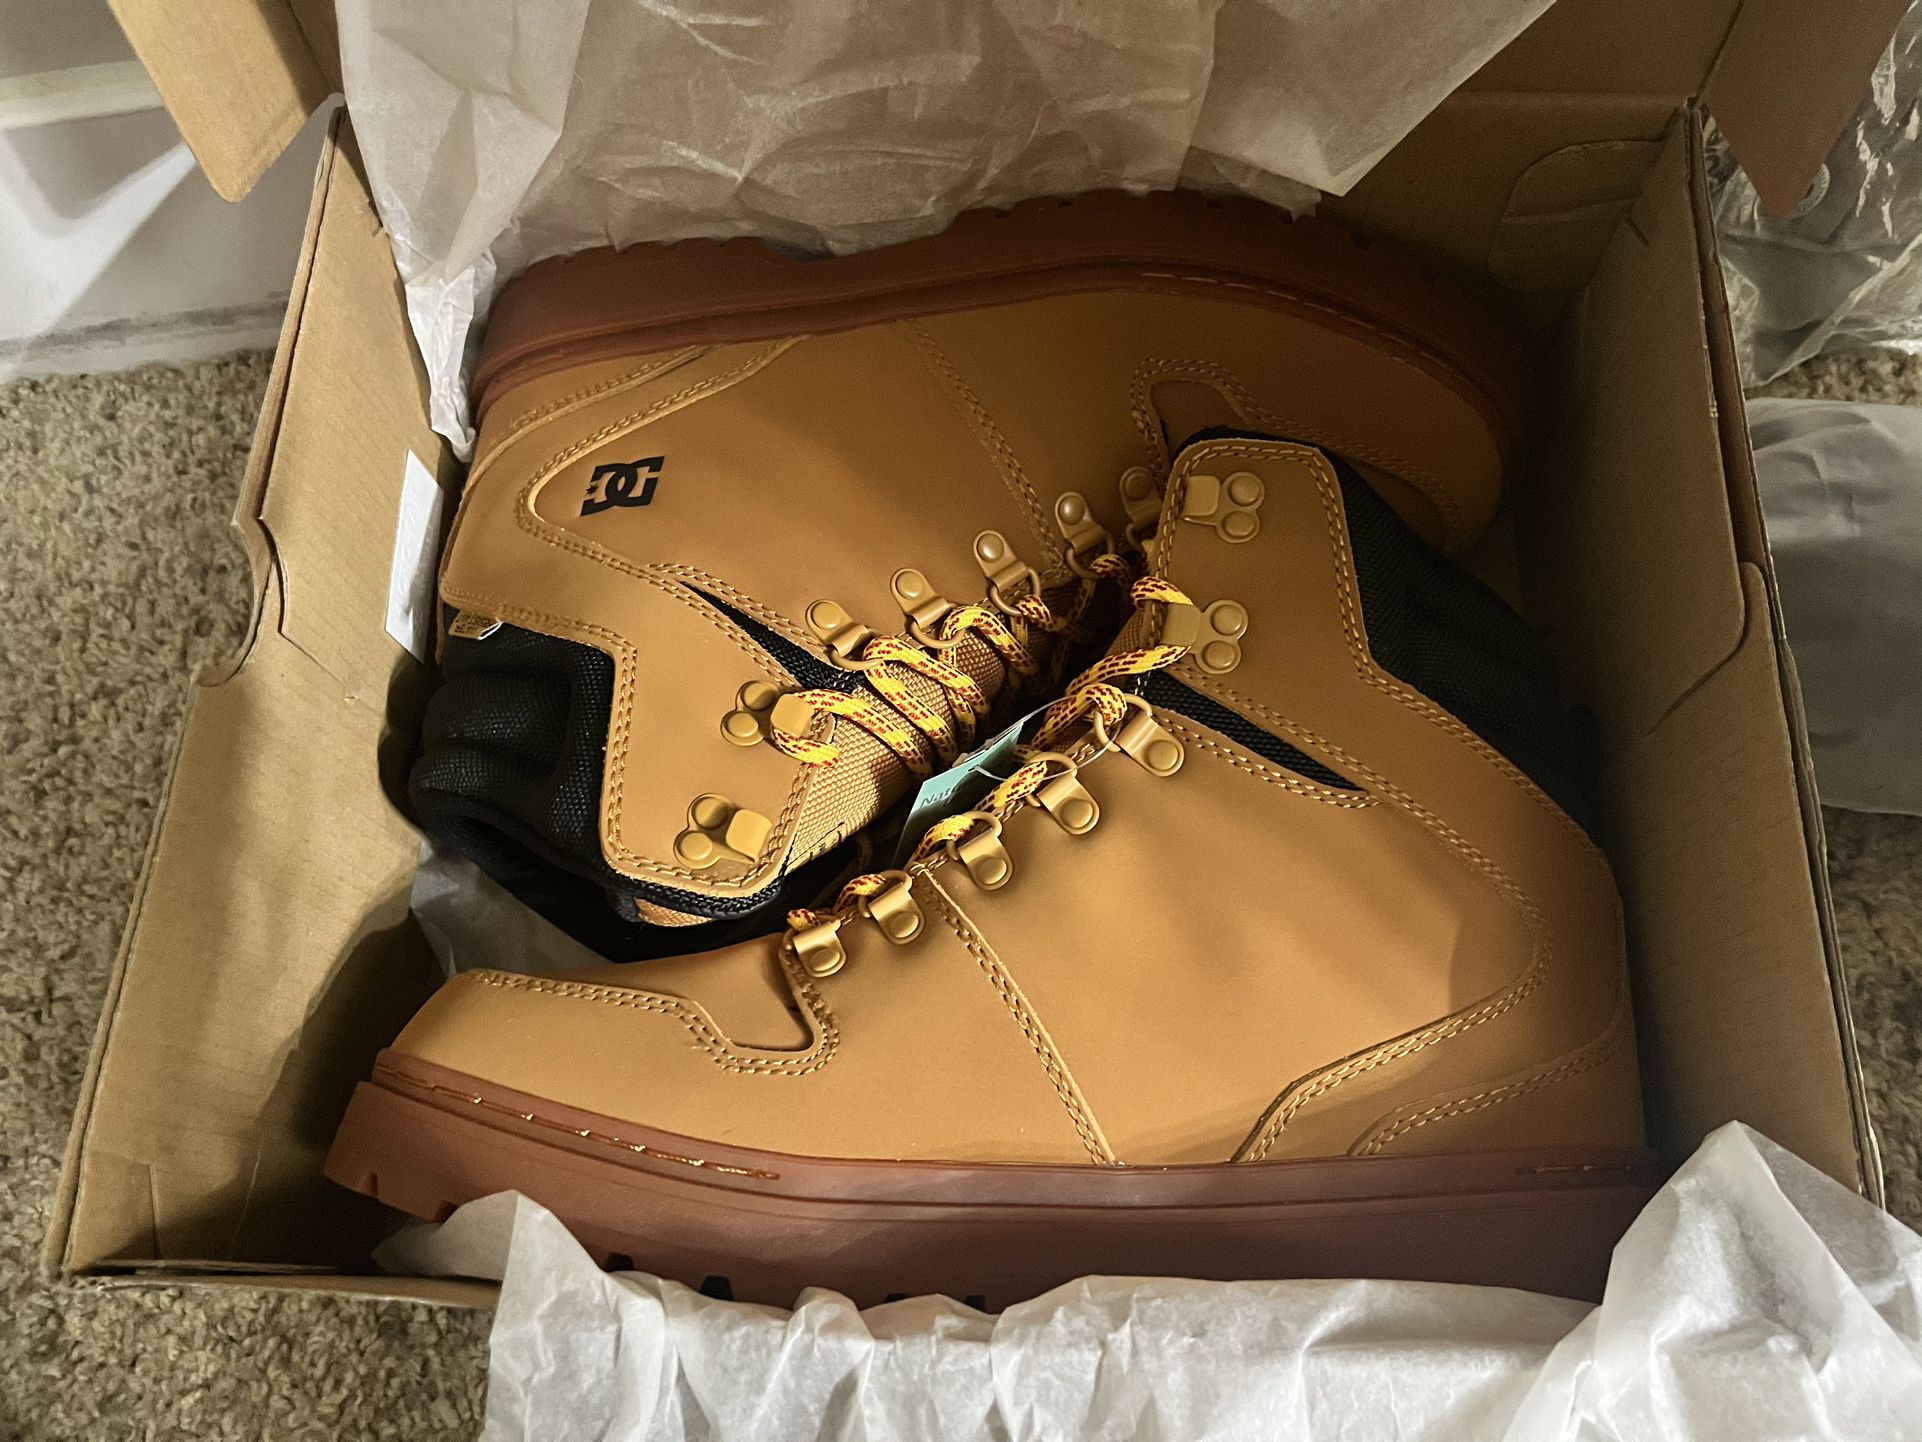 Men’s DC Perry boots